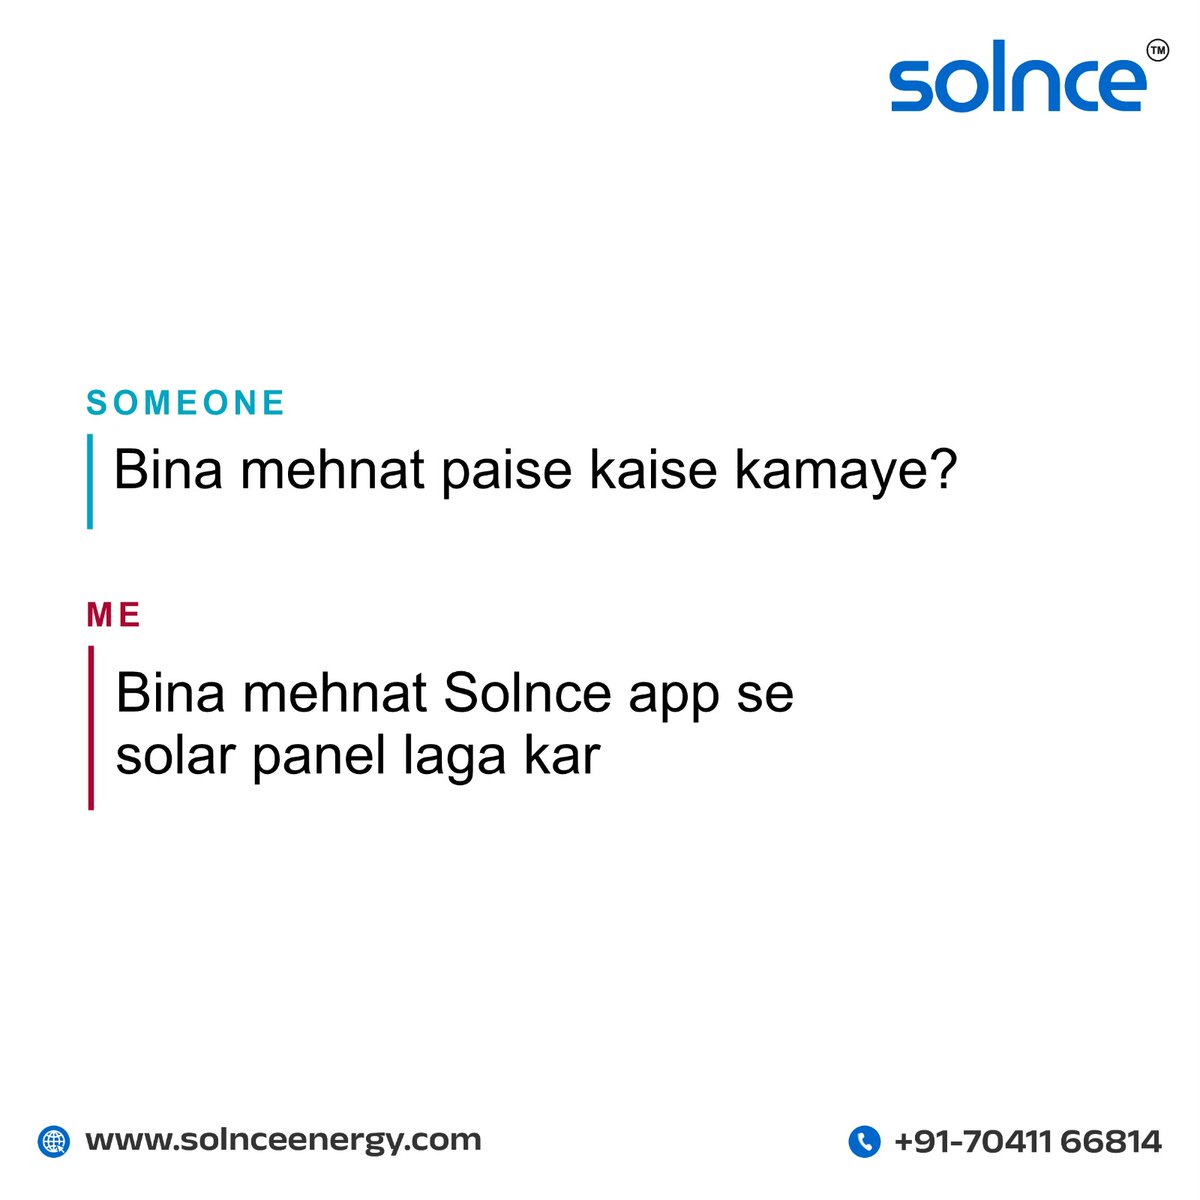 #Solnce hai toh mumkin hai! Save huge amount on electricity bill with Solnce. Download the app today and get variety of dealers to choose from for your #solarenergy related services!
.
.
.
.
#solarpower #solarpanel #solarsolutions #earn #PMSuryaGharYojana #HarGharSolar #India